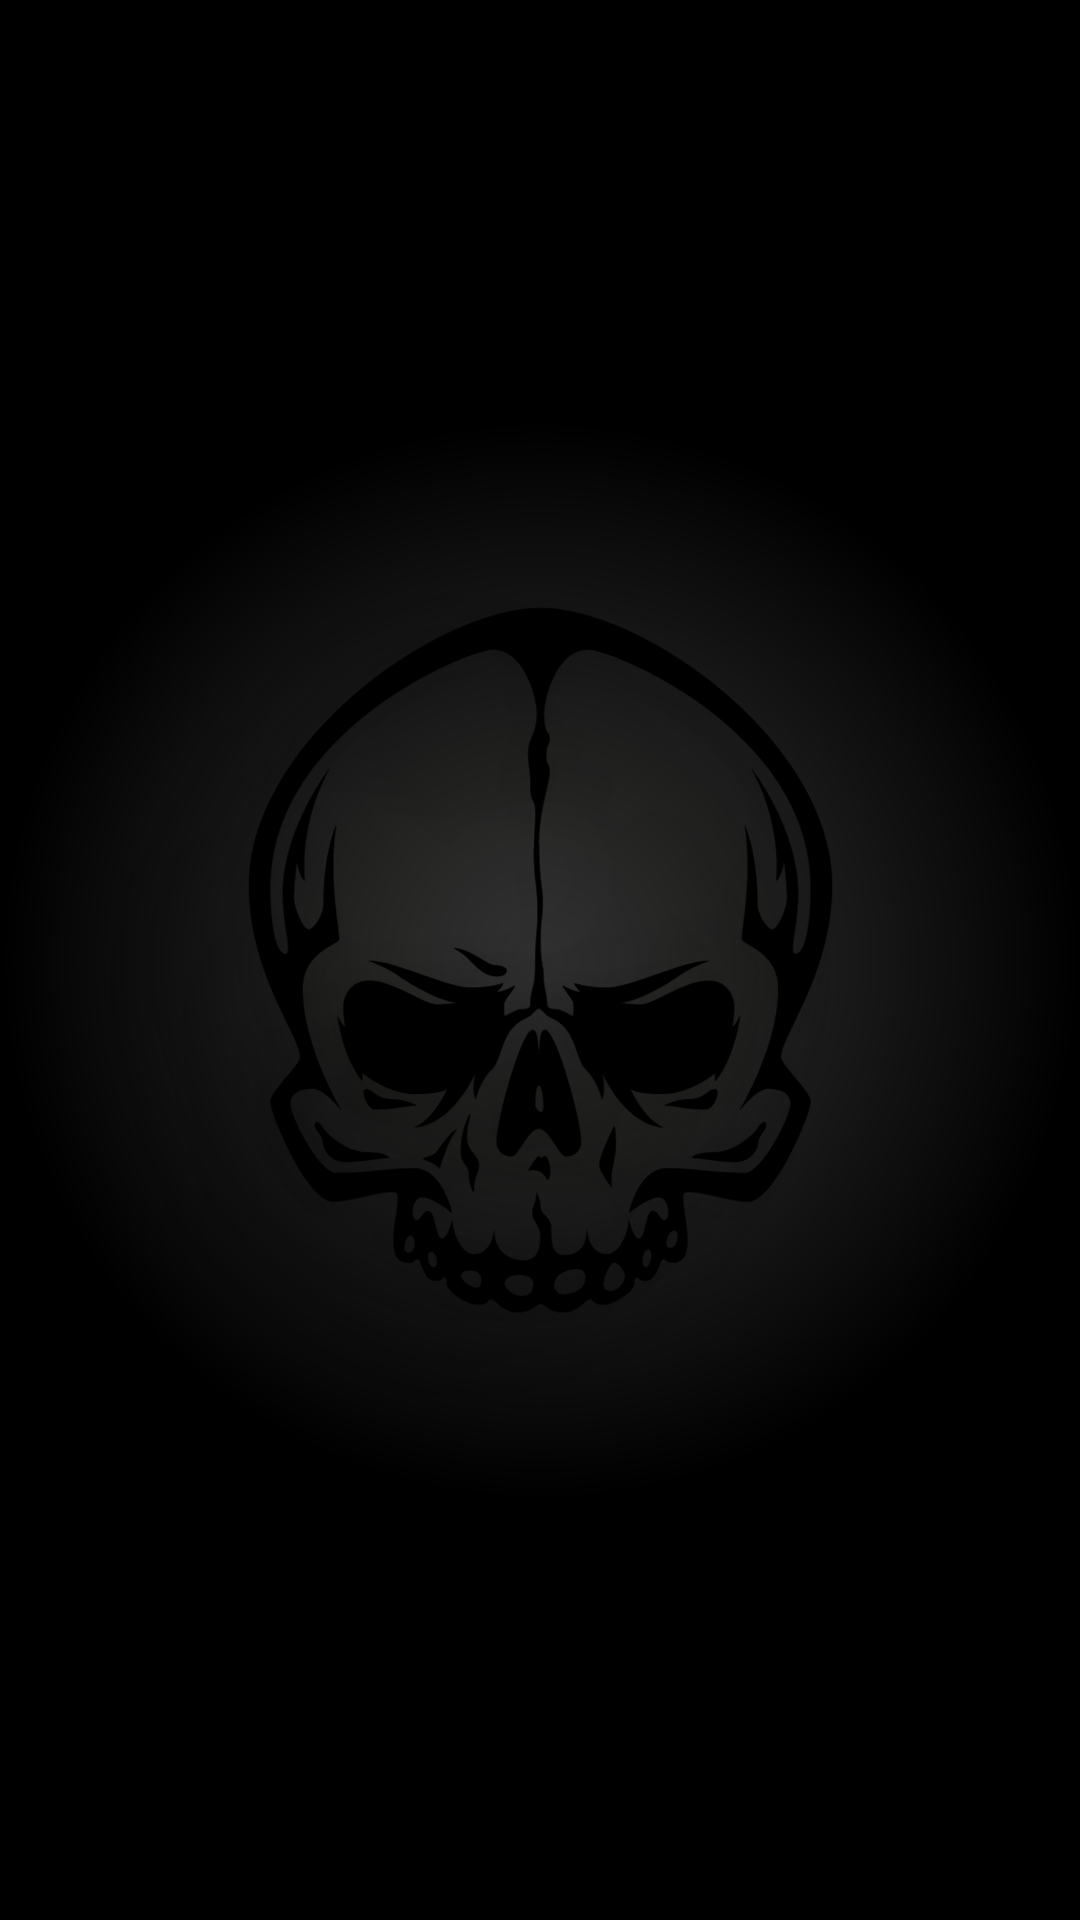 Hd Skull Wallpaper For Android, Picture